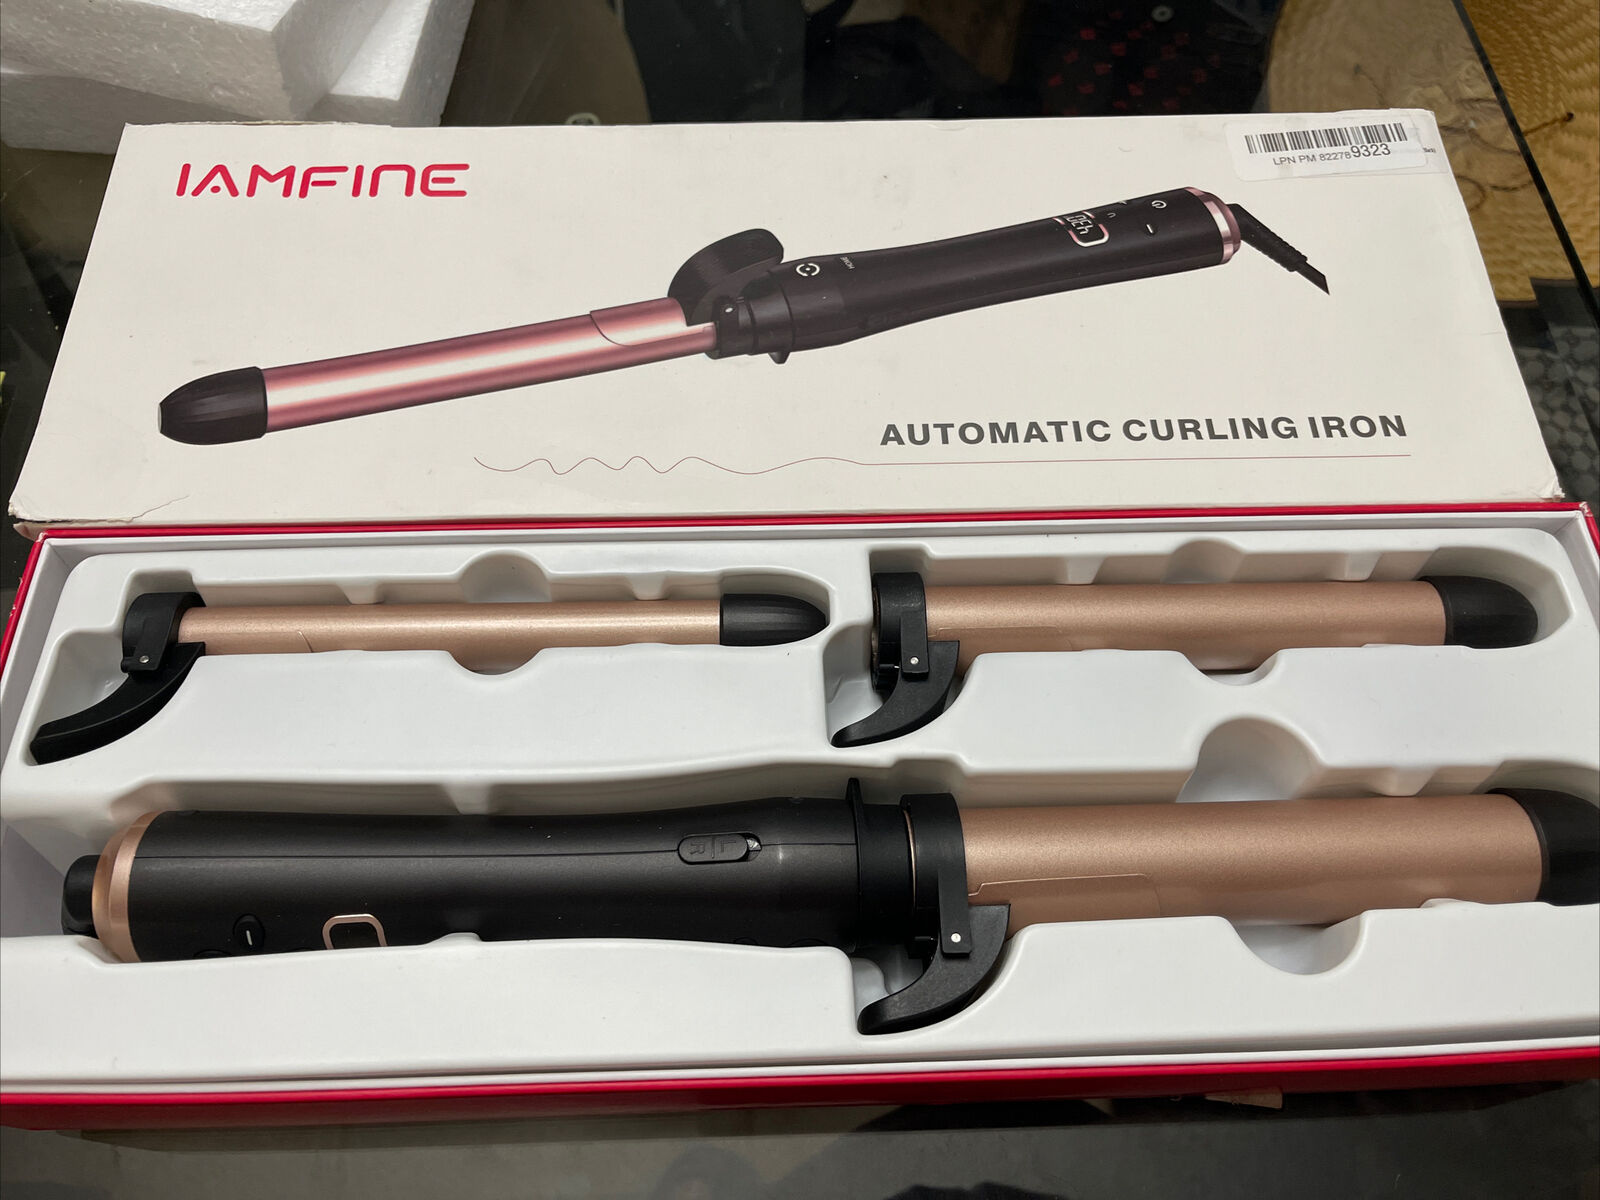 IAMFINE 買い物 Automatic Rotating Curling Iron 【第1位獲得！】 with 3 .75” Size 1.25” 1” Barrels and